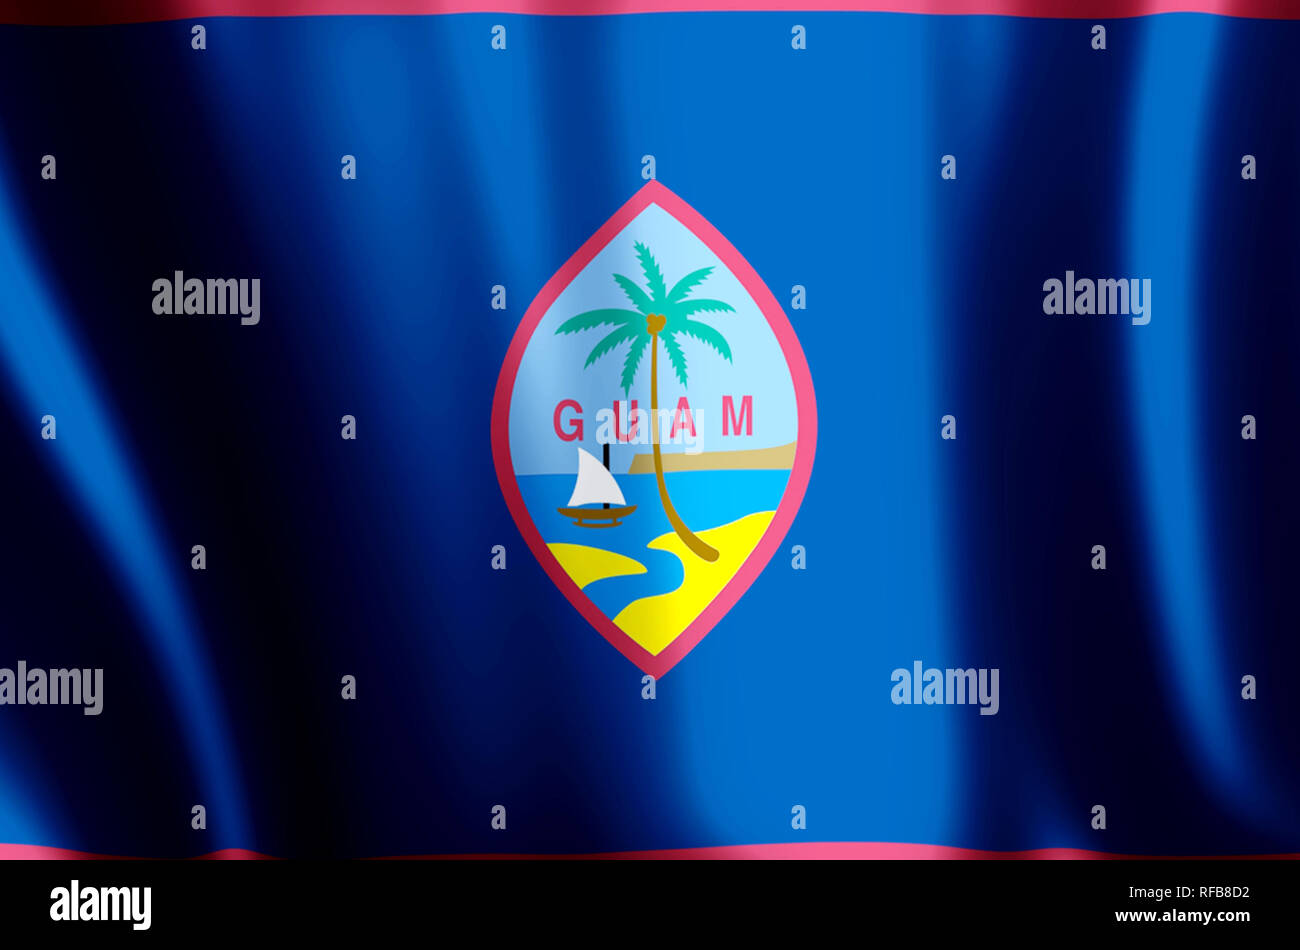 Guam stylish waving and closeup flag illustration. Perfect for background or texture purposes. Stock Photo